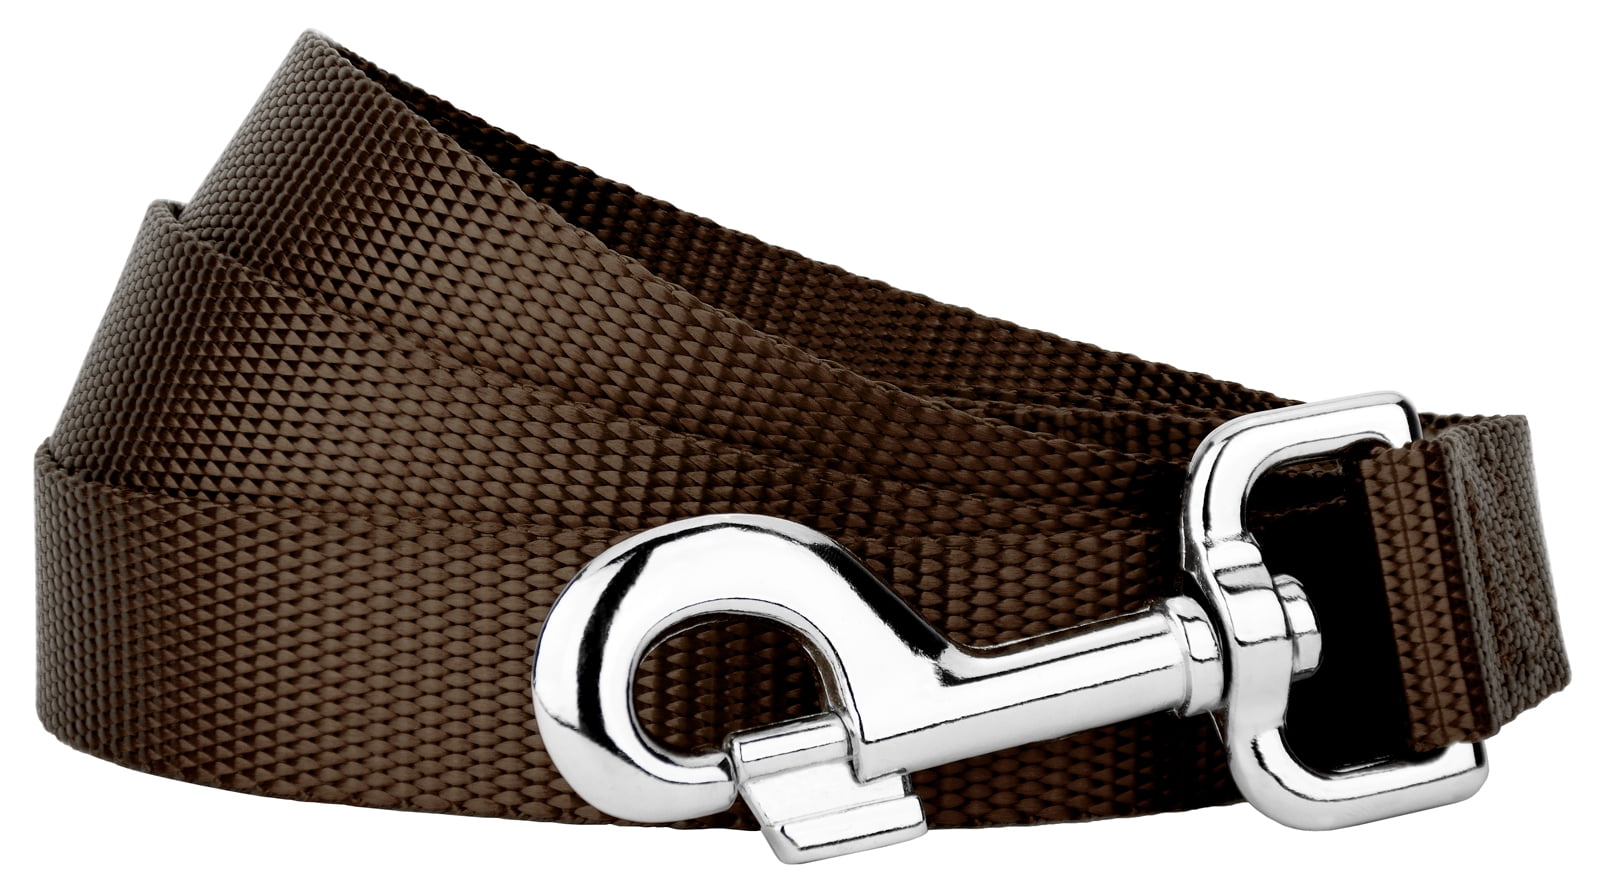 Brown Genuine Leather Dog Leash Lead Training 9.8ft long 1/2" wide US Free ship 